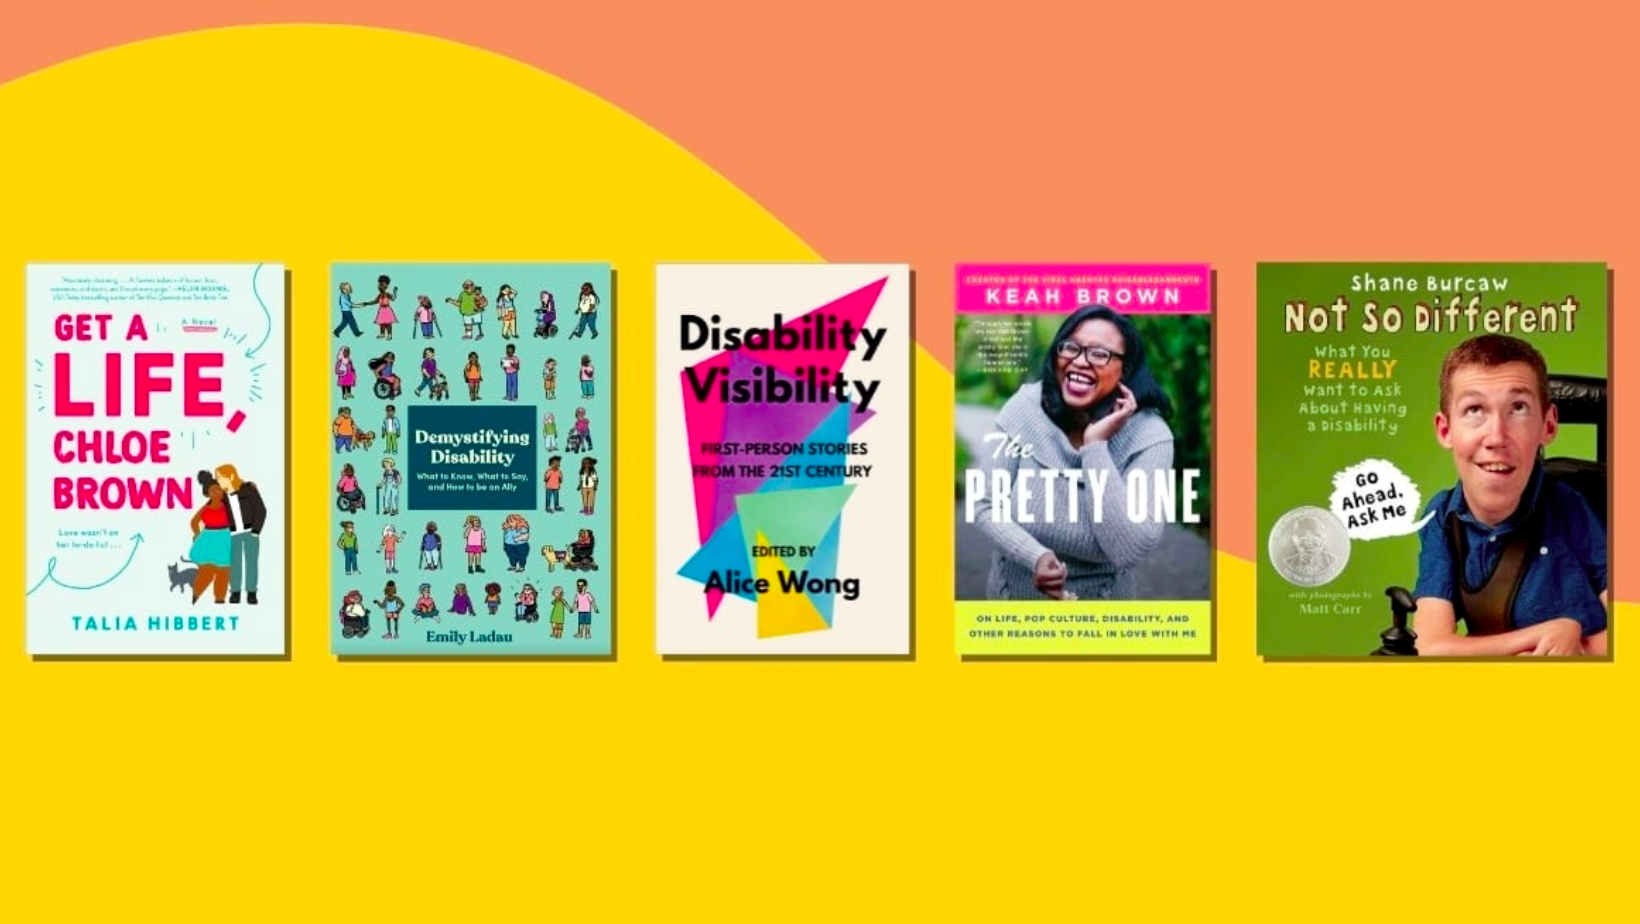 Images of five book covers are displayed on a yellow and pink background. From left to right, the books are Get a Life Chloe Brown by Talia Hibbert, Demystifying Disability by Emily Ladau, Disability Visibility edited by Alice Wong, The Pretty One by Keah Brown, and Not So Different by Shane Burcaw.